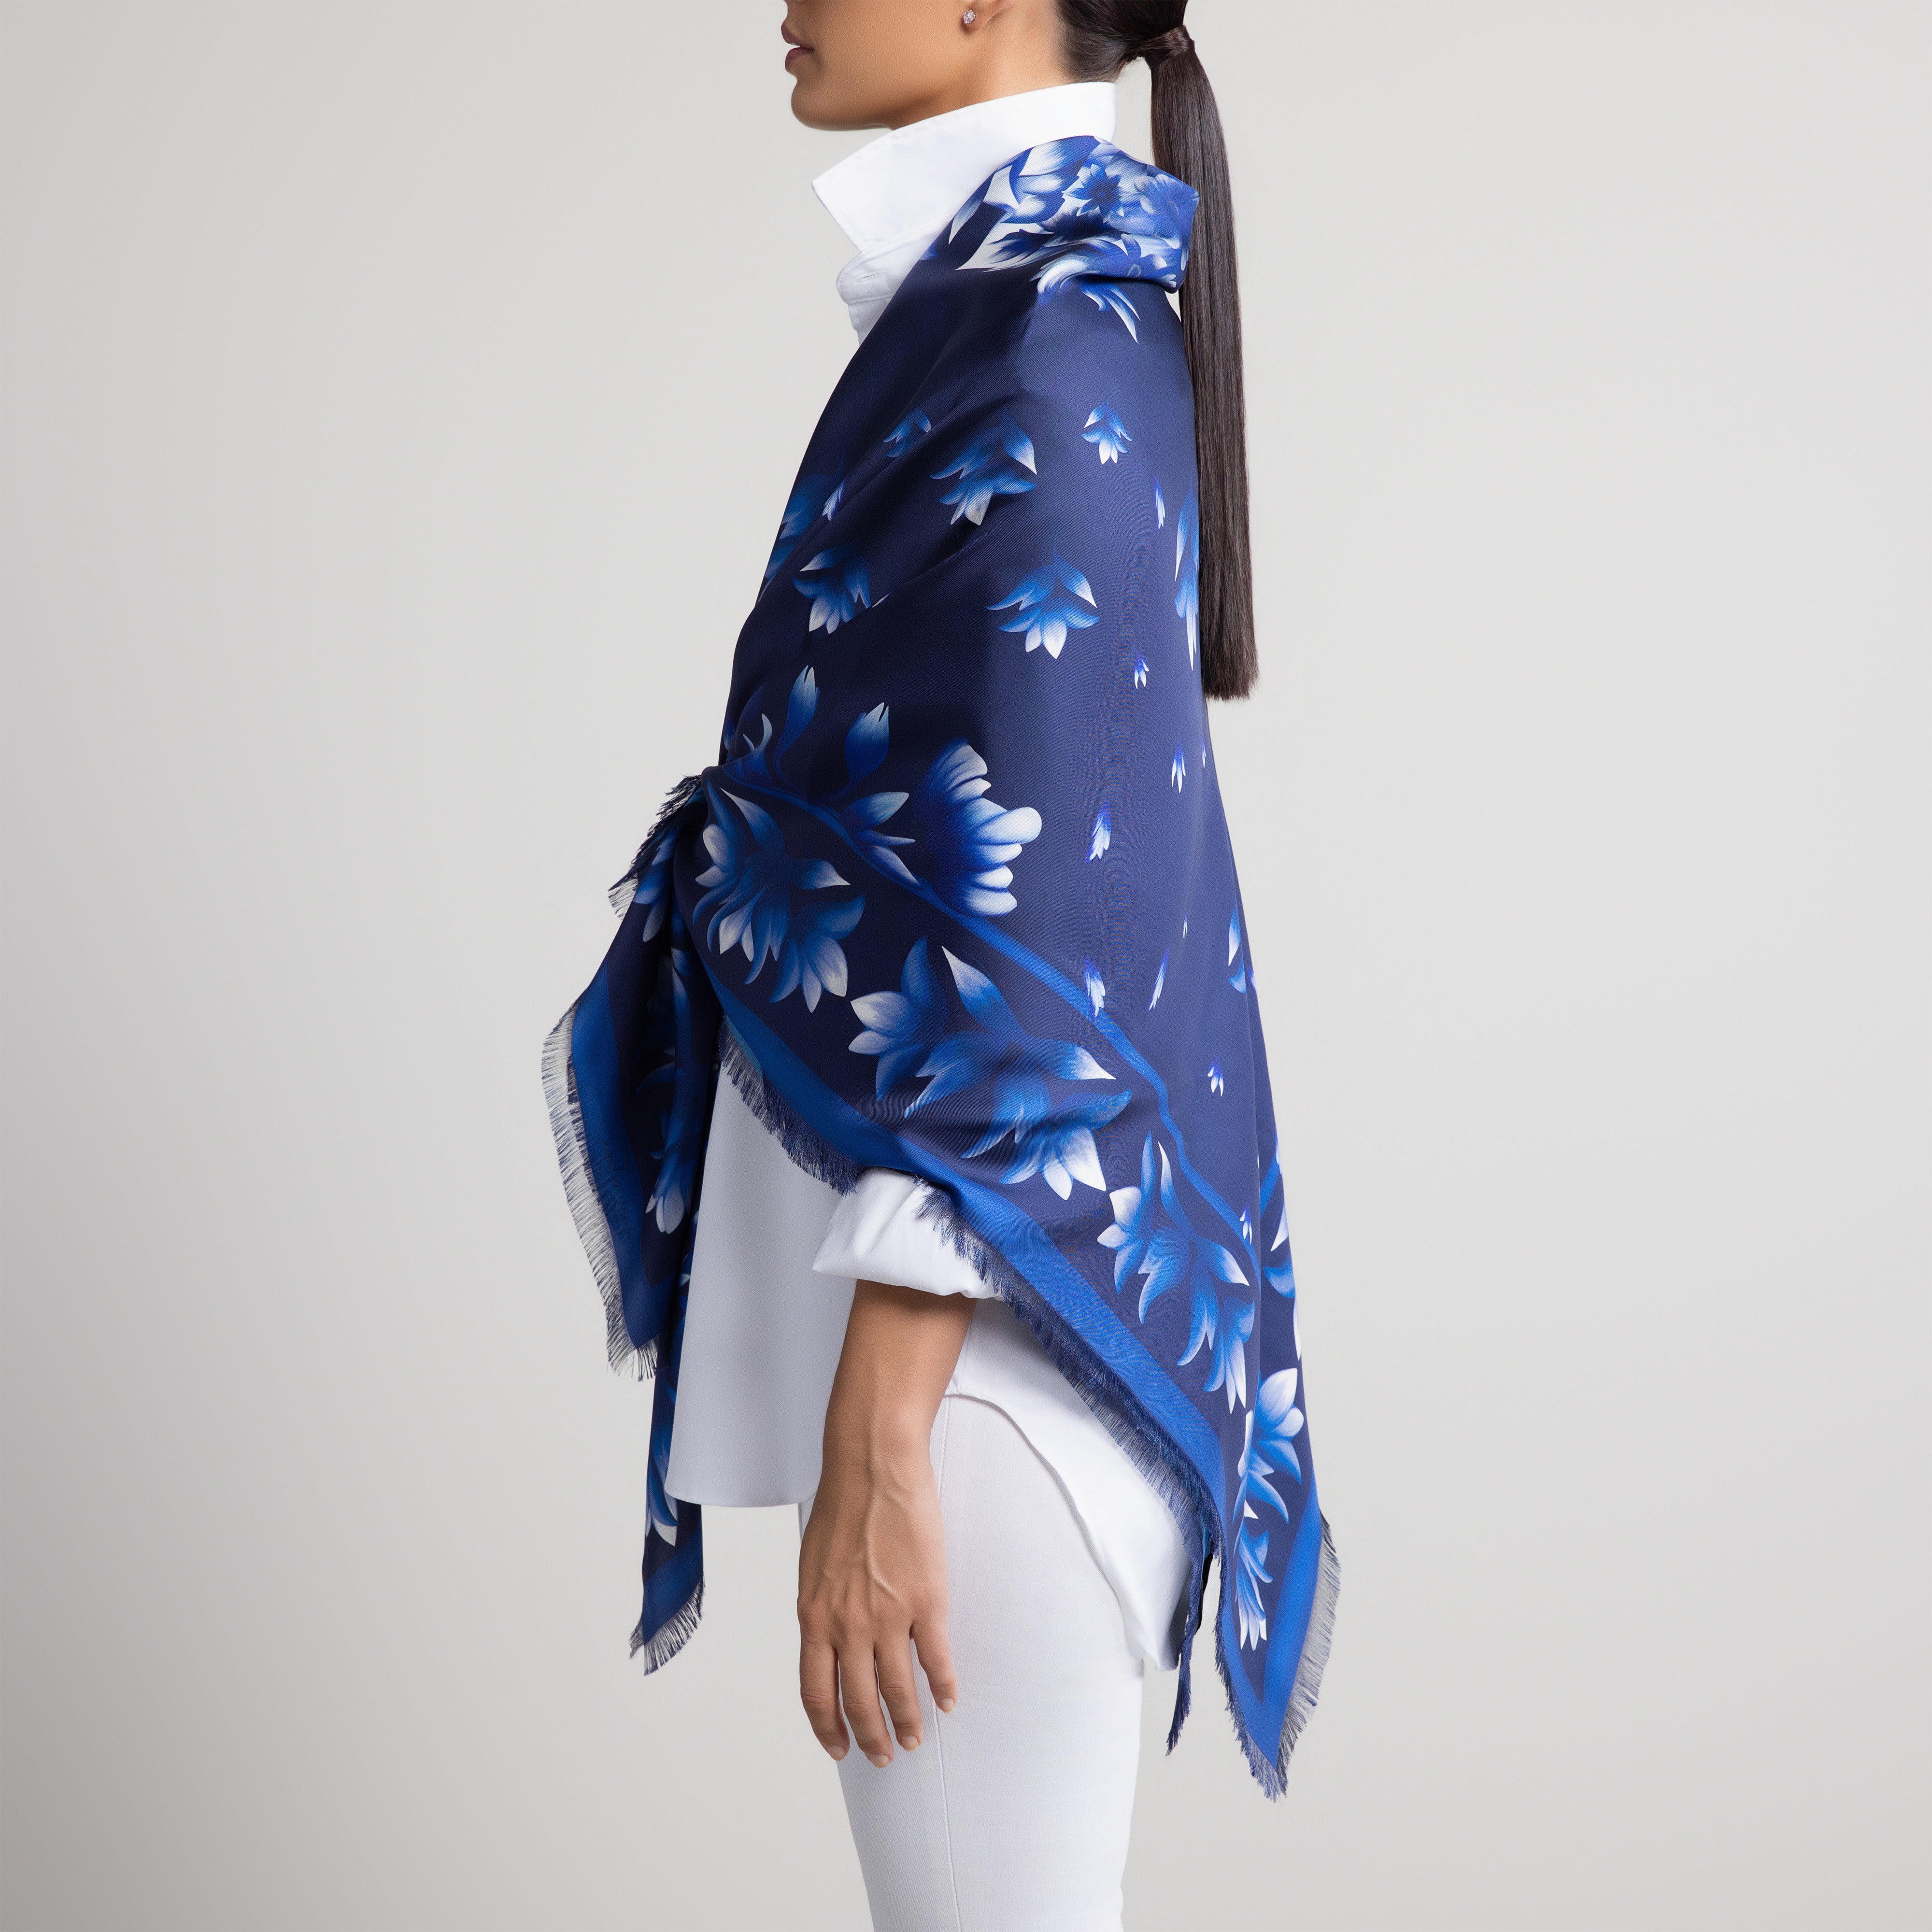 Azul Grande Silk Scarf in Navy Blue with Hand-Feathered Edges